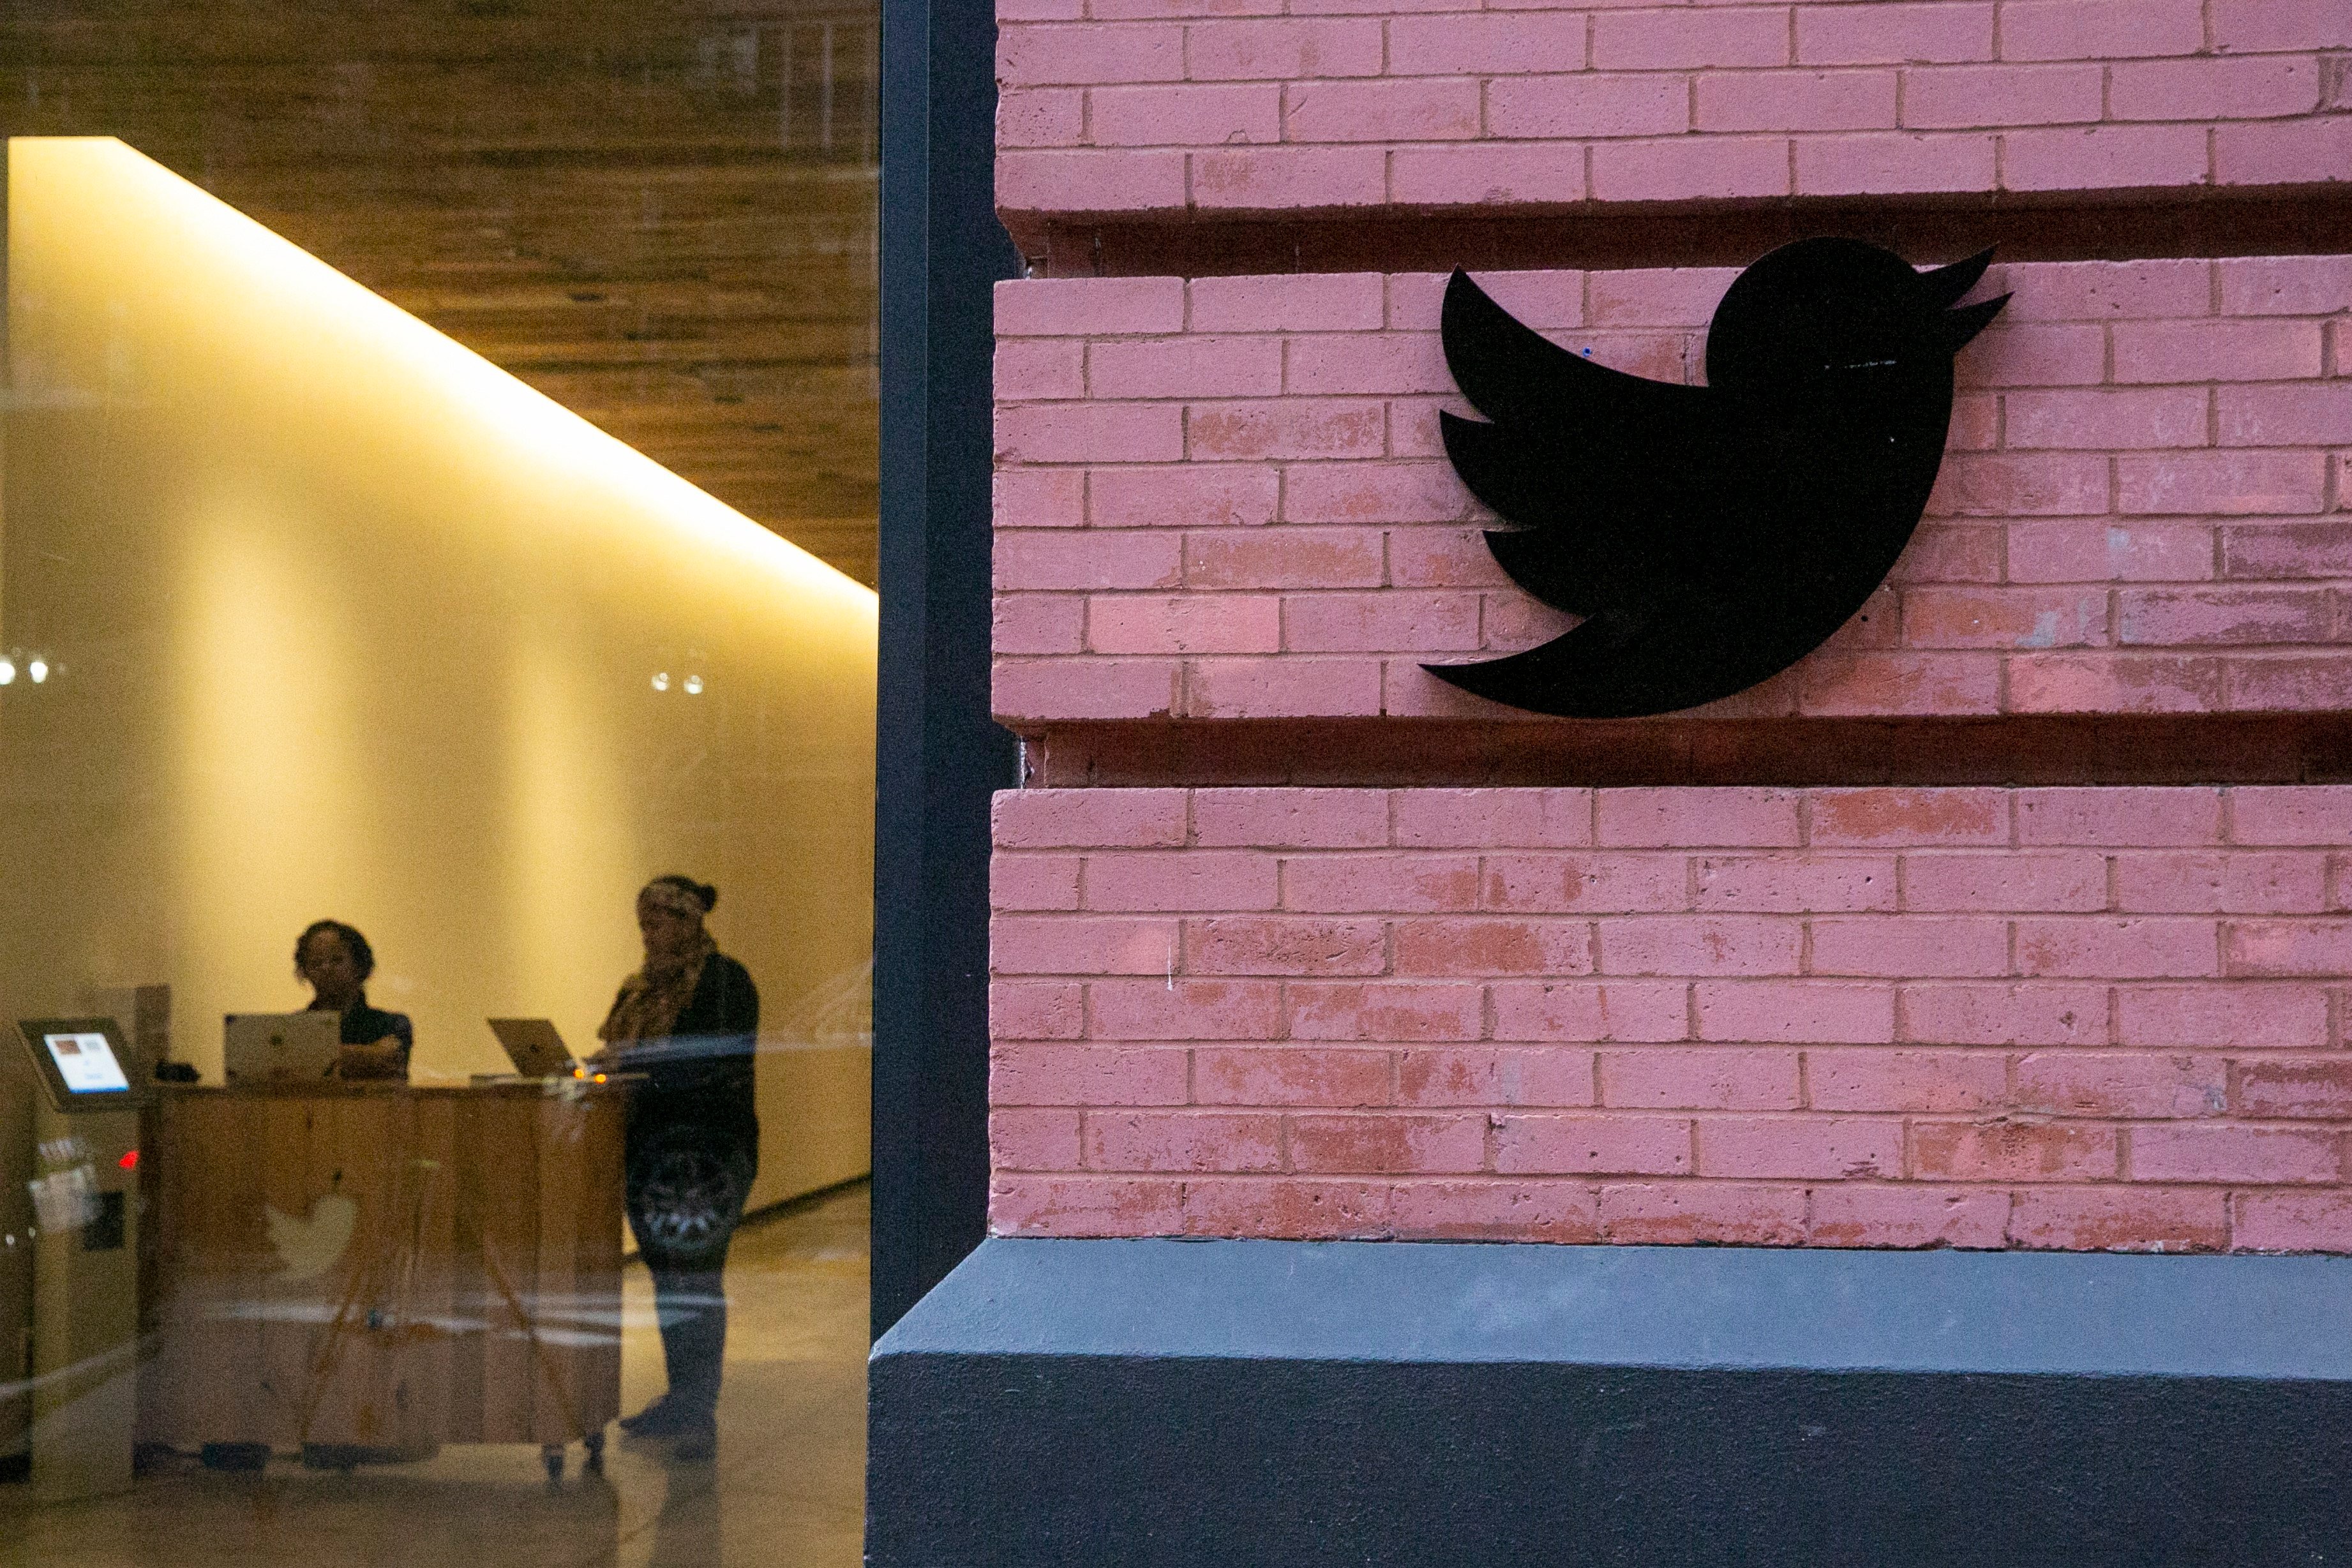 A view of Twitter’s office in New York on November 18. Amid mass firings and resignations since Elon Musk took control, the social media company’s future is in doubt. Photo: EPA-EFE 